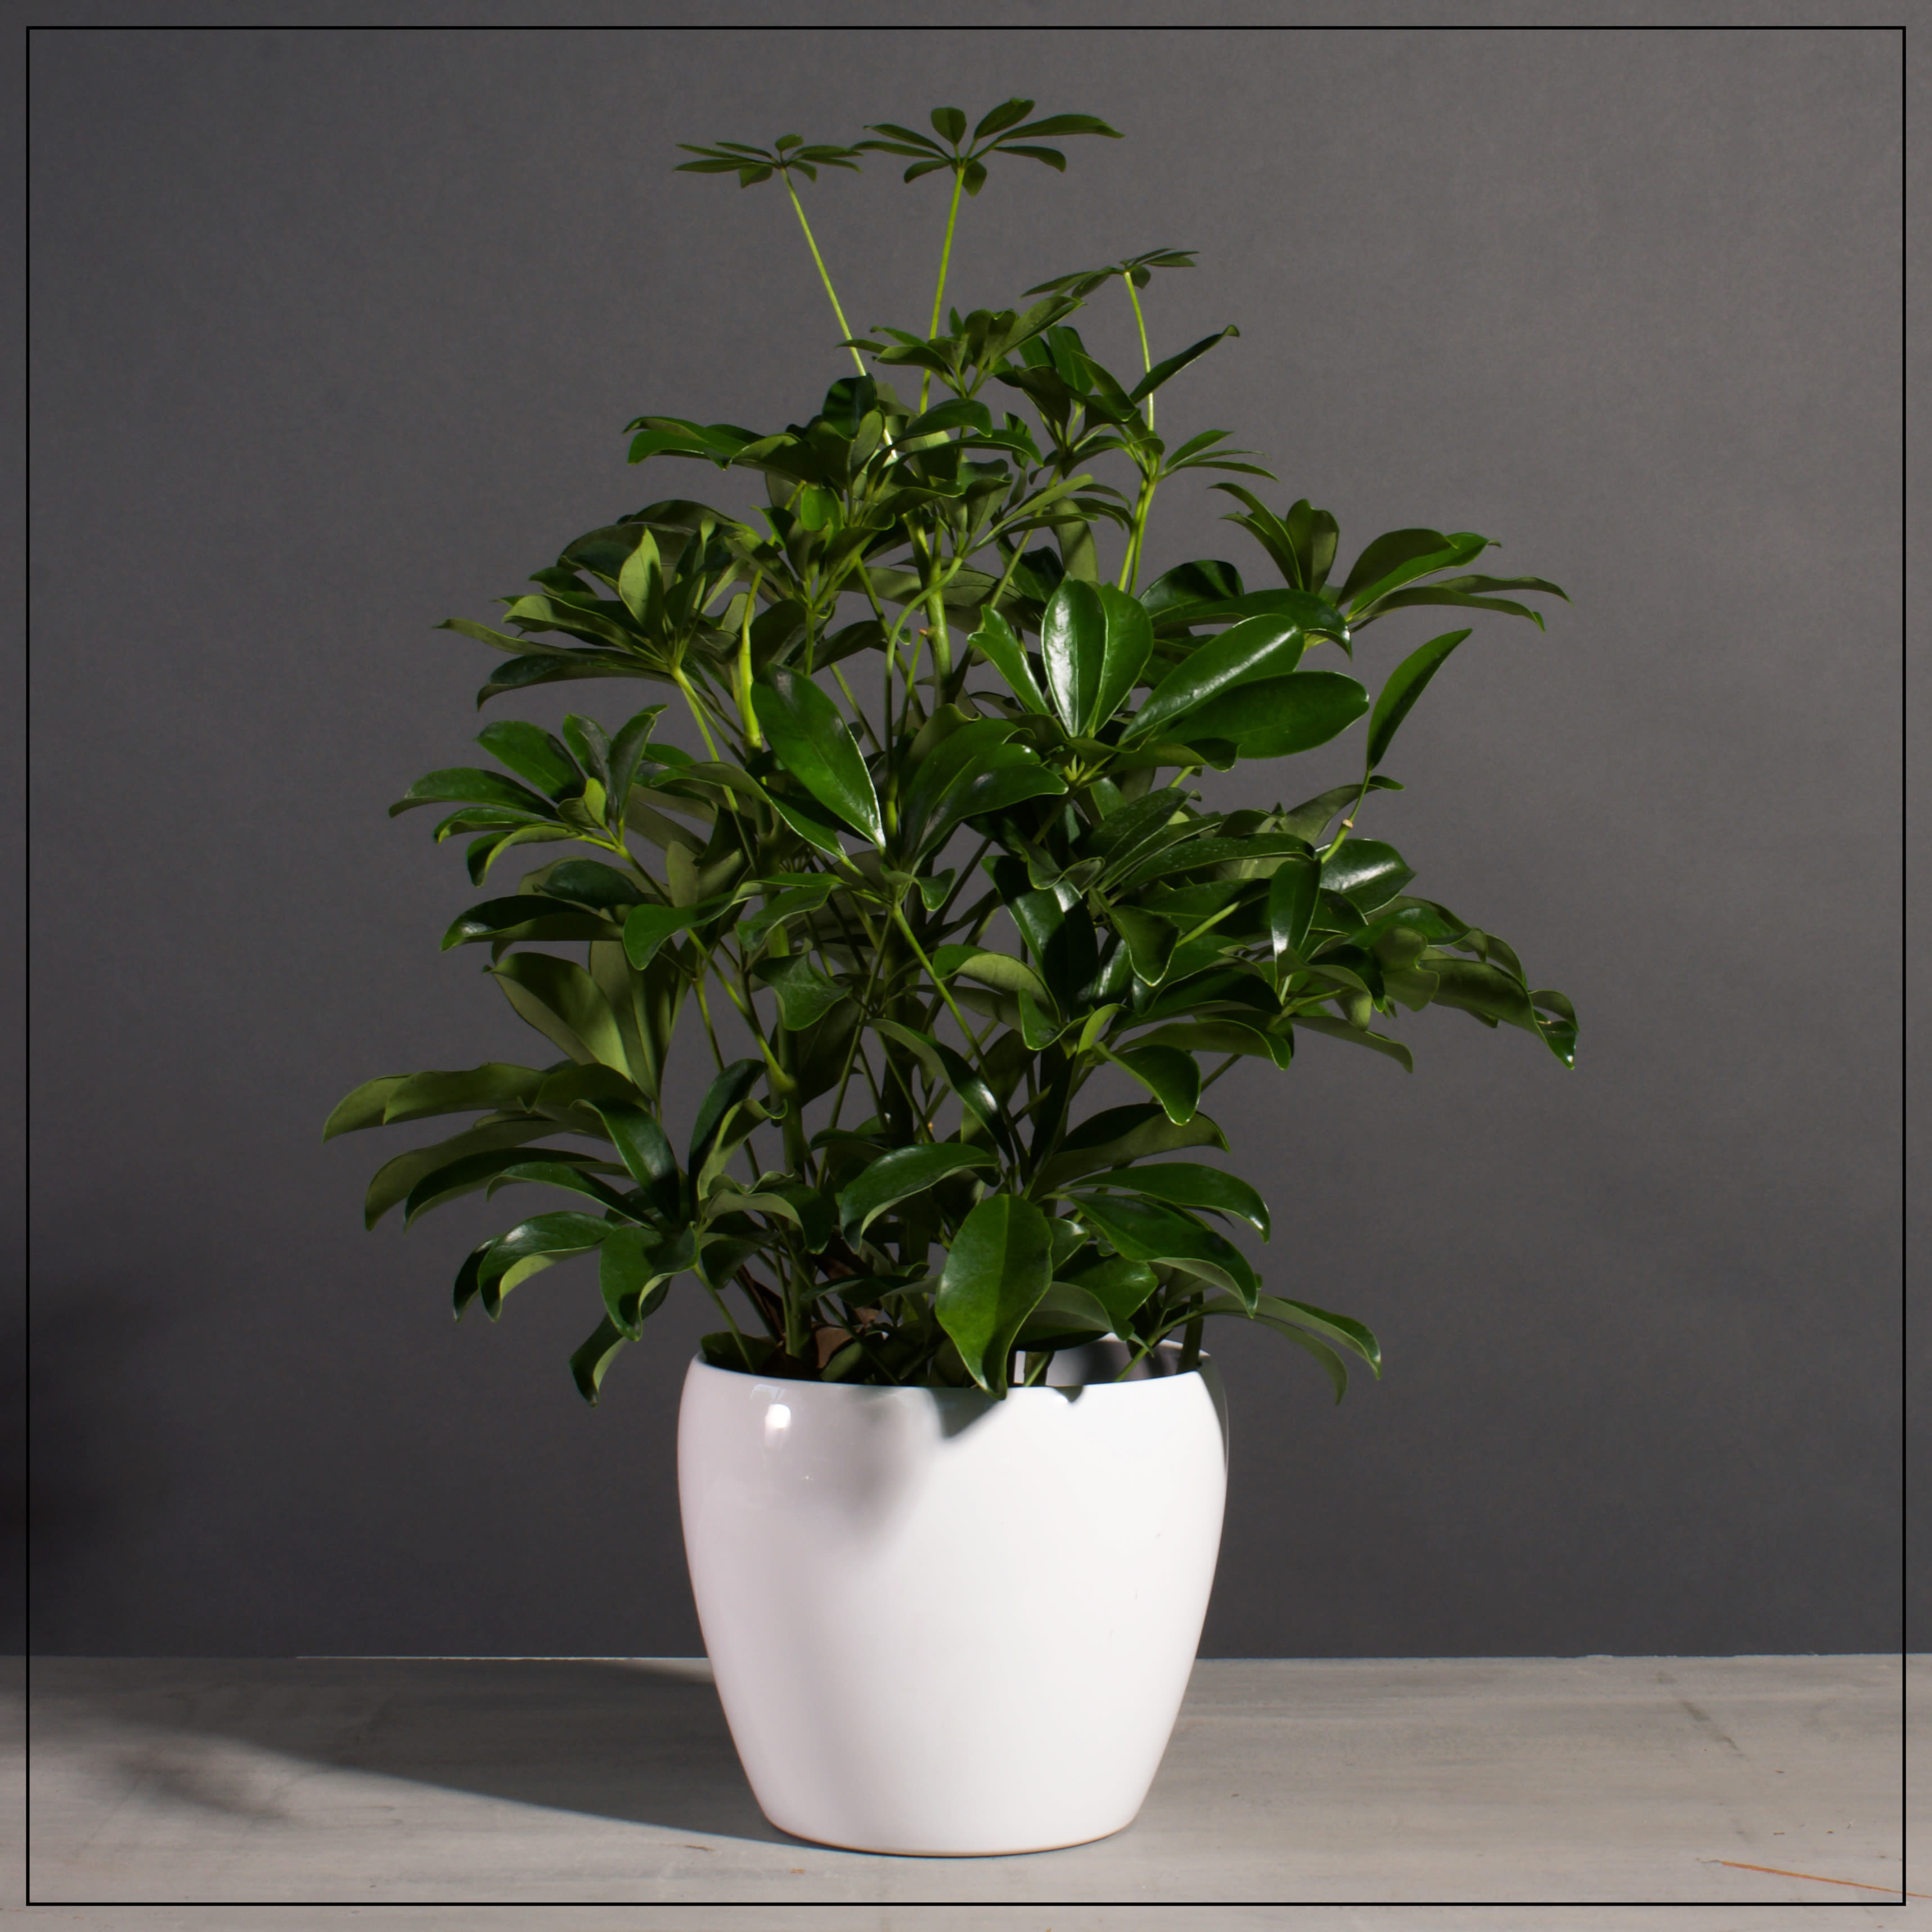 Schefflera in White Ceramic Pot - Delivered in a white ceramic pot. Schefflera Plants do best in moderately light. (Comes in 8in and 10in pot)